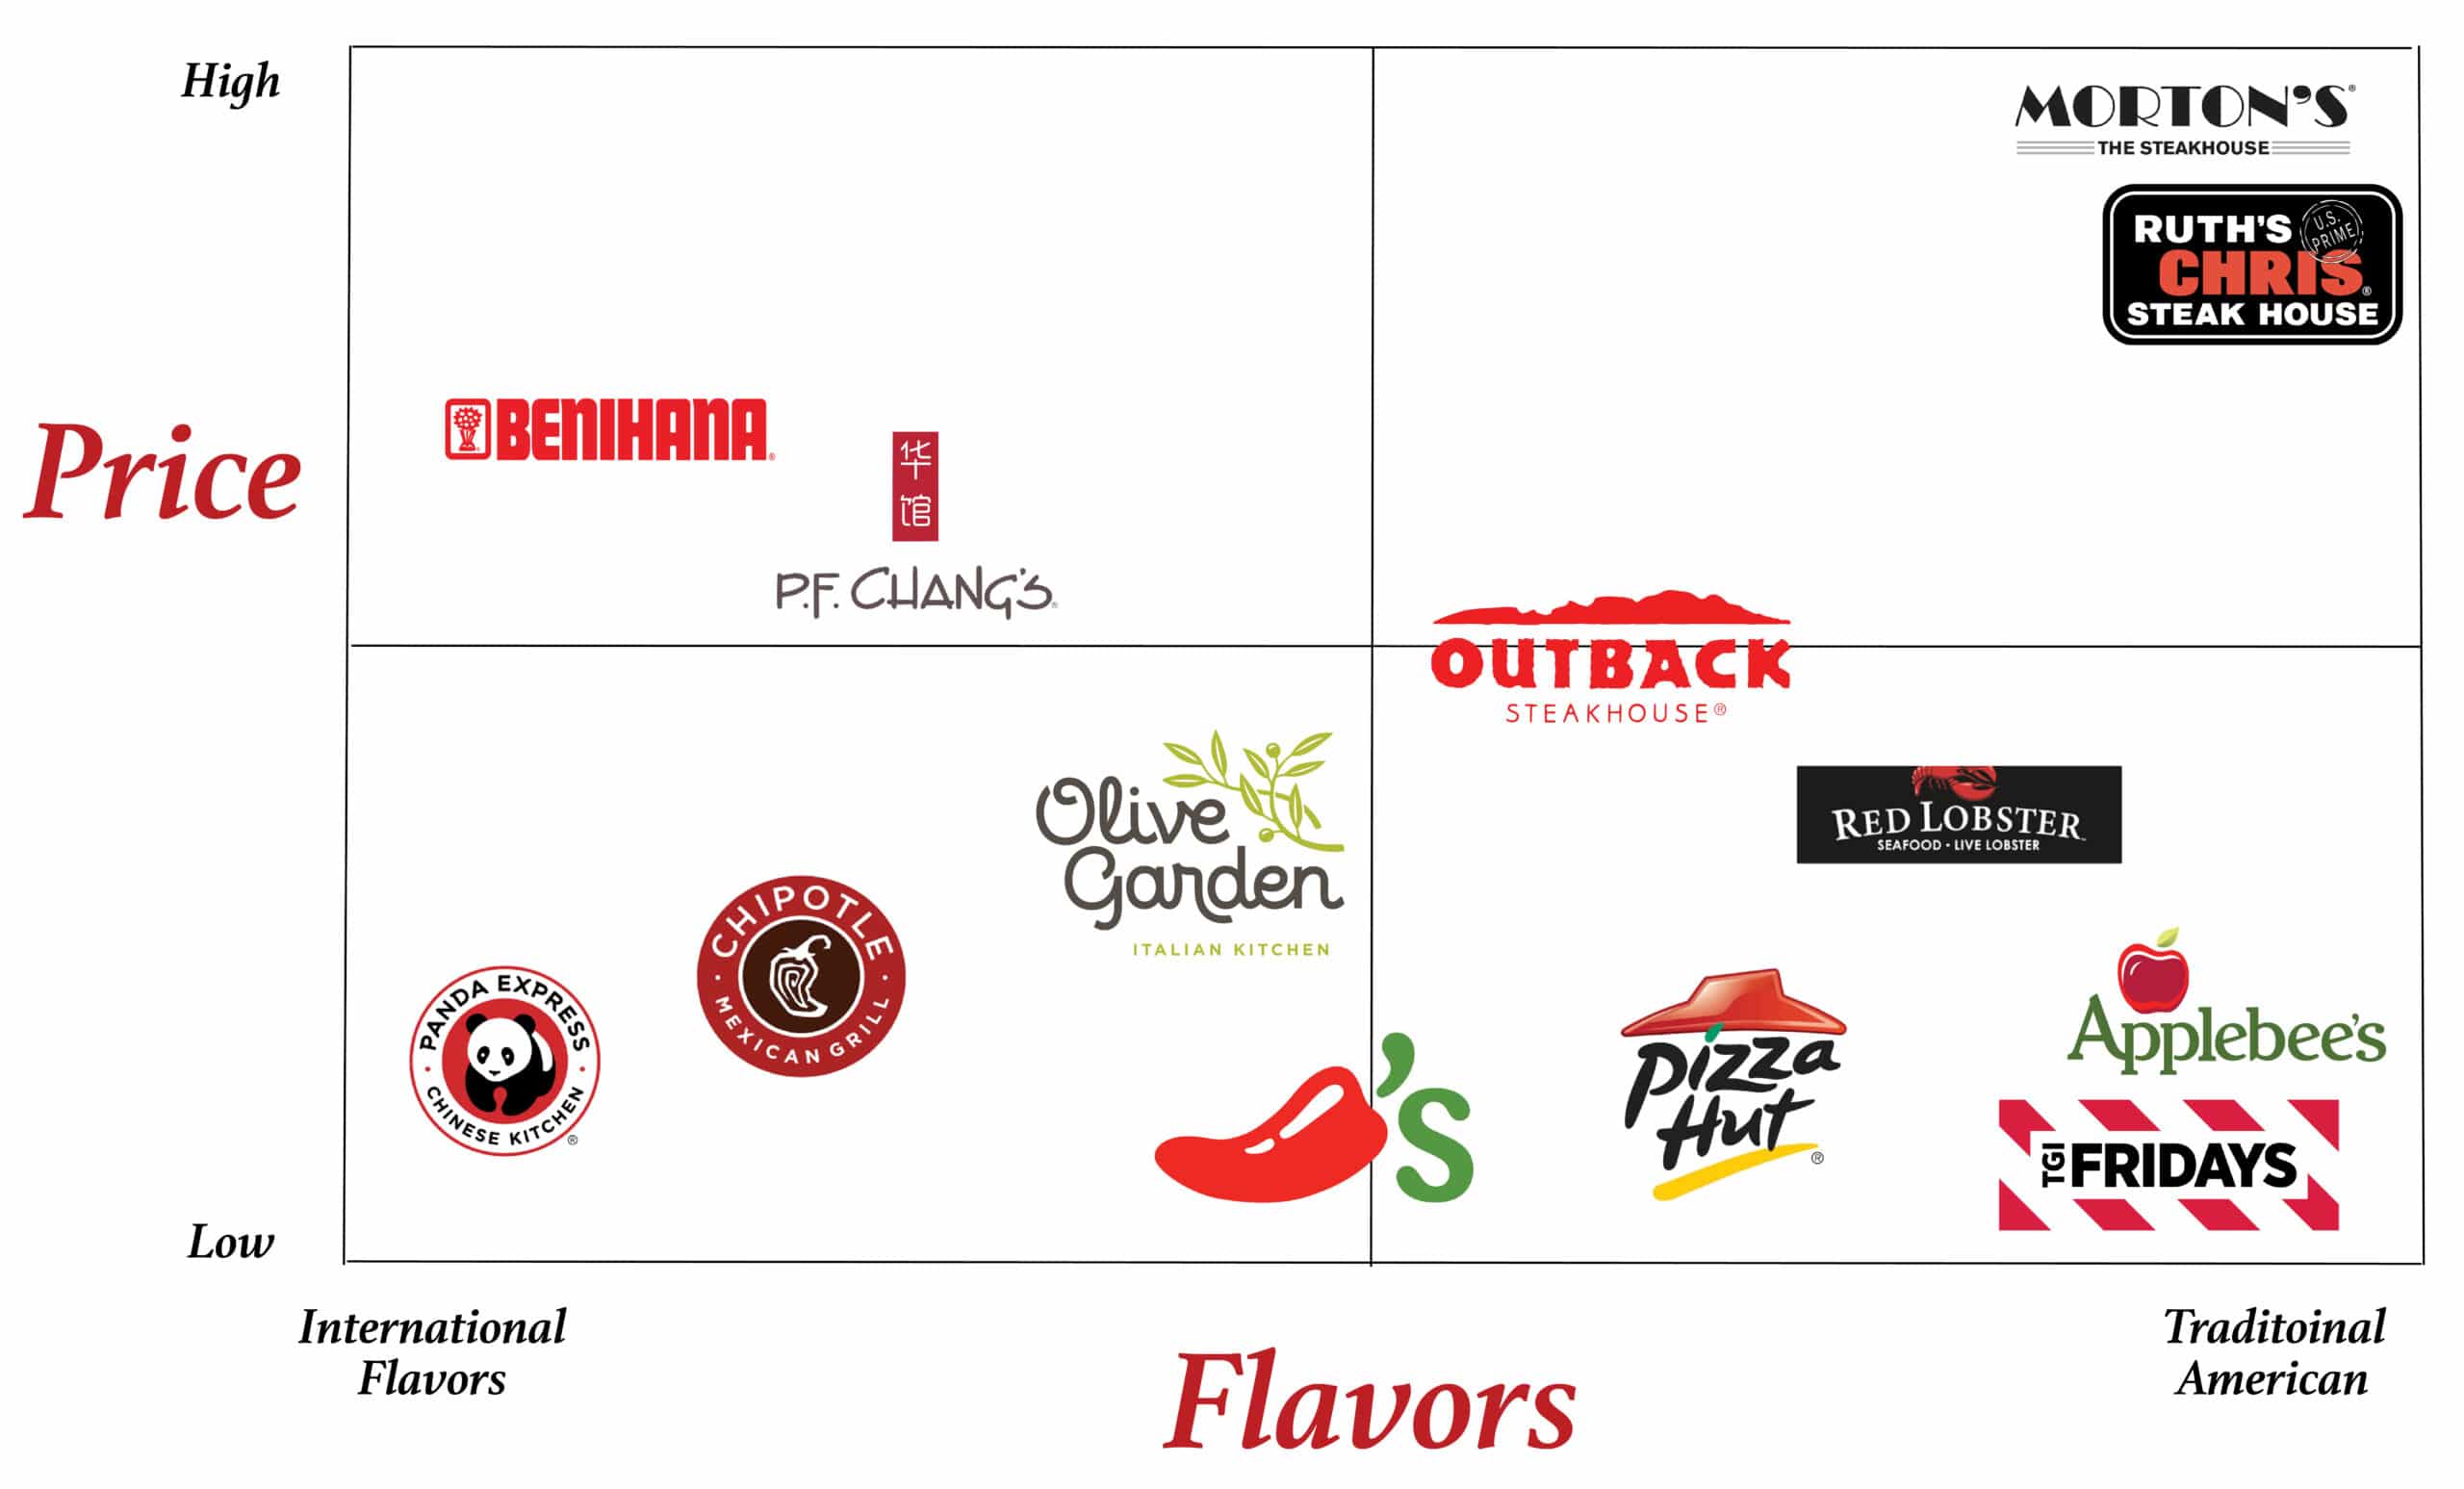 Using a brand positioning map to differentiate